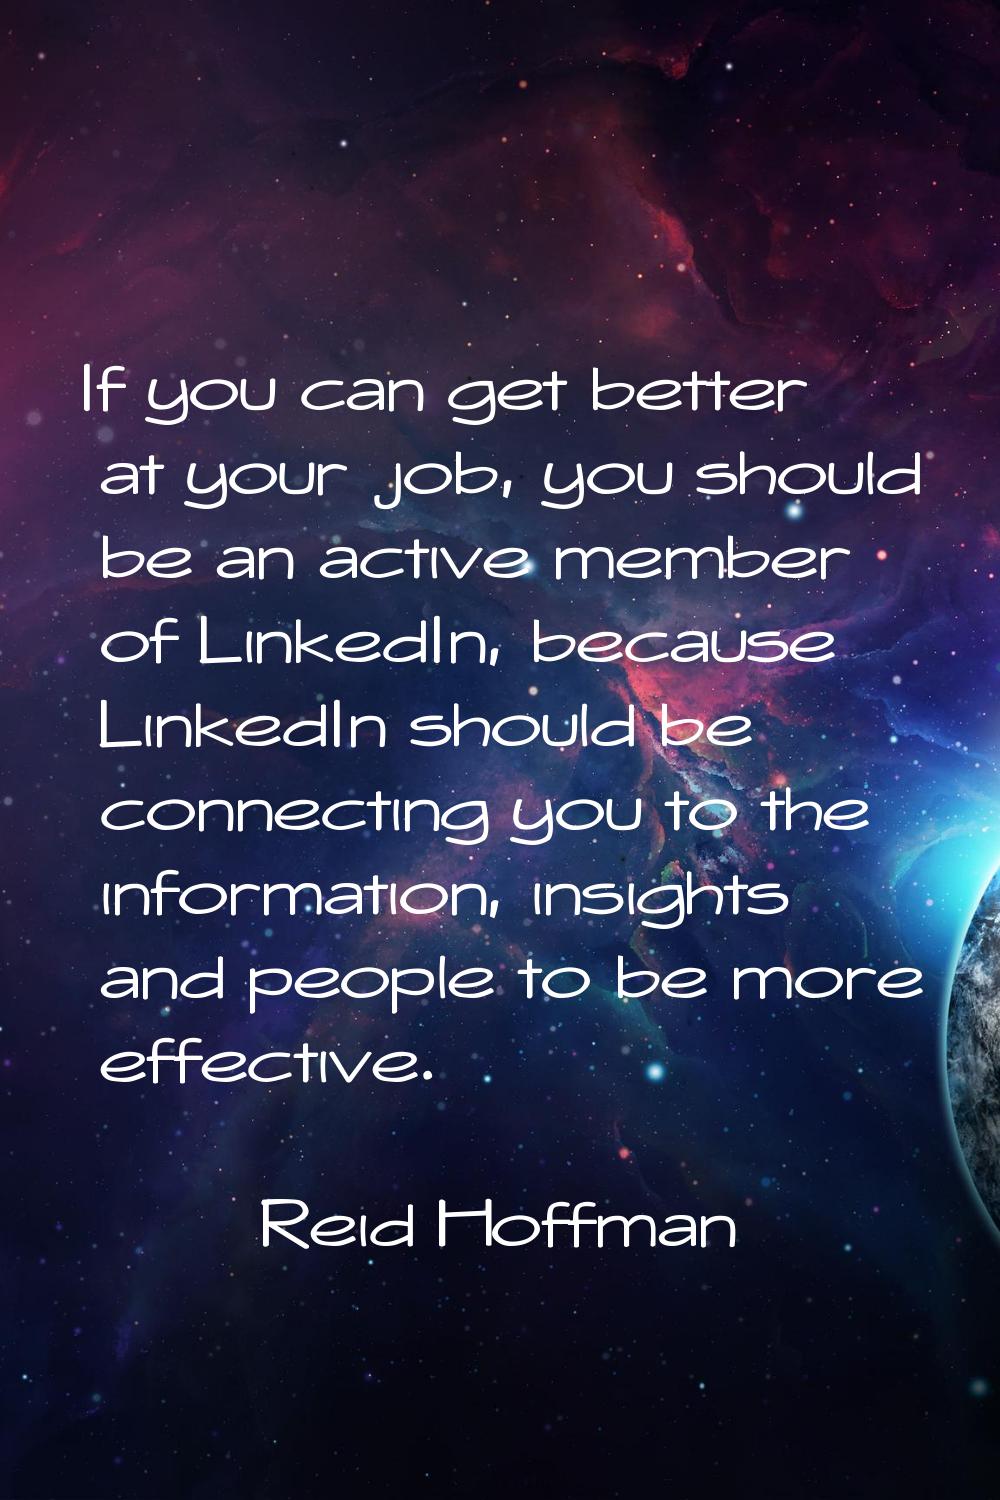 If you can get better at your job, you should be an active member of LinkedIn, because LinkedIn sho